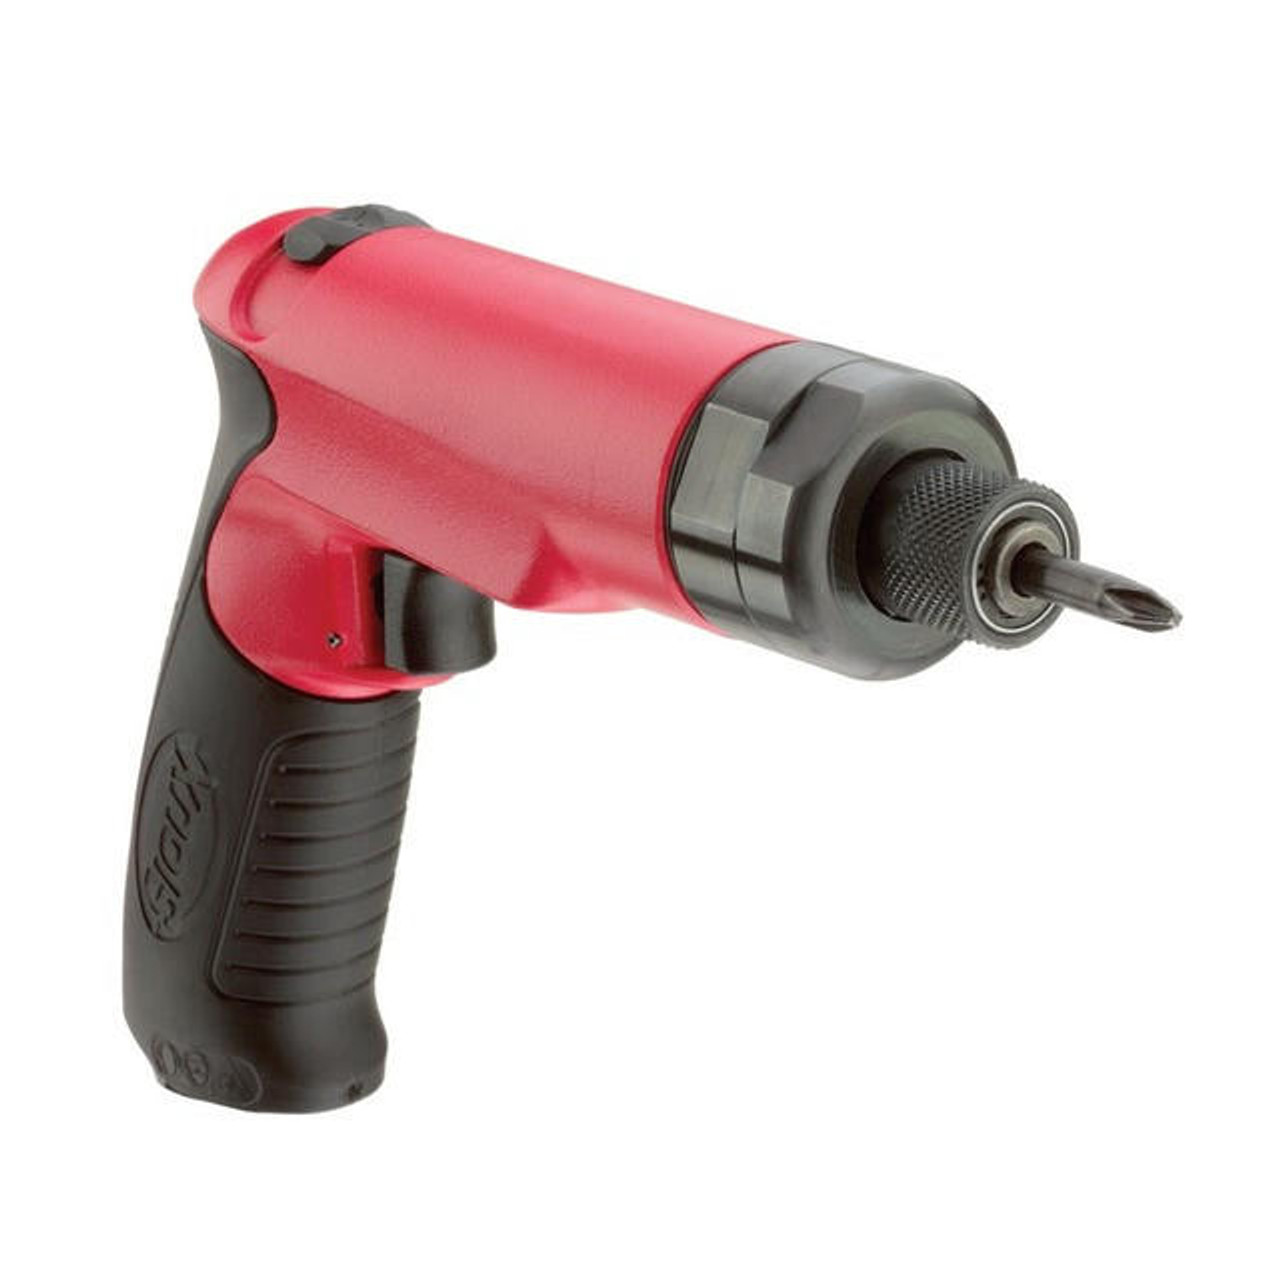  Sioux Tools SSD10P3S Stall Pistol Grip Screwdriver | Shuttle Reverse | 1 HP | 300 RPM | 400 in.-lb. Max Torque 